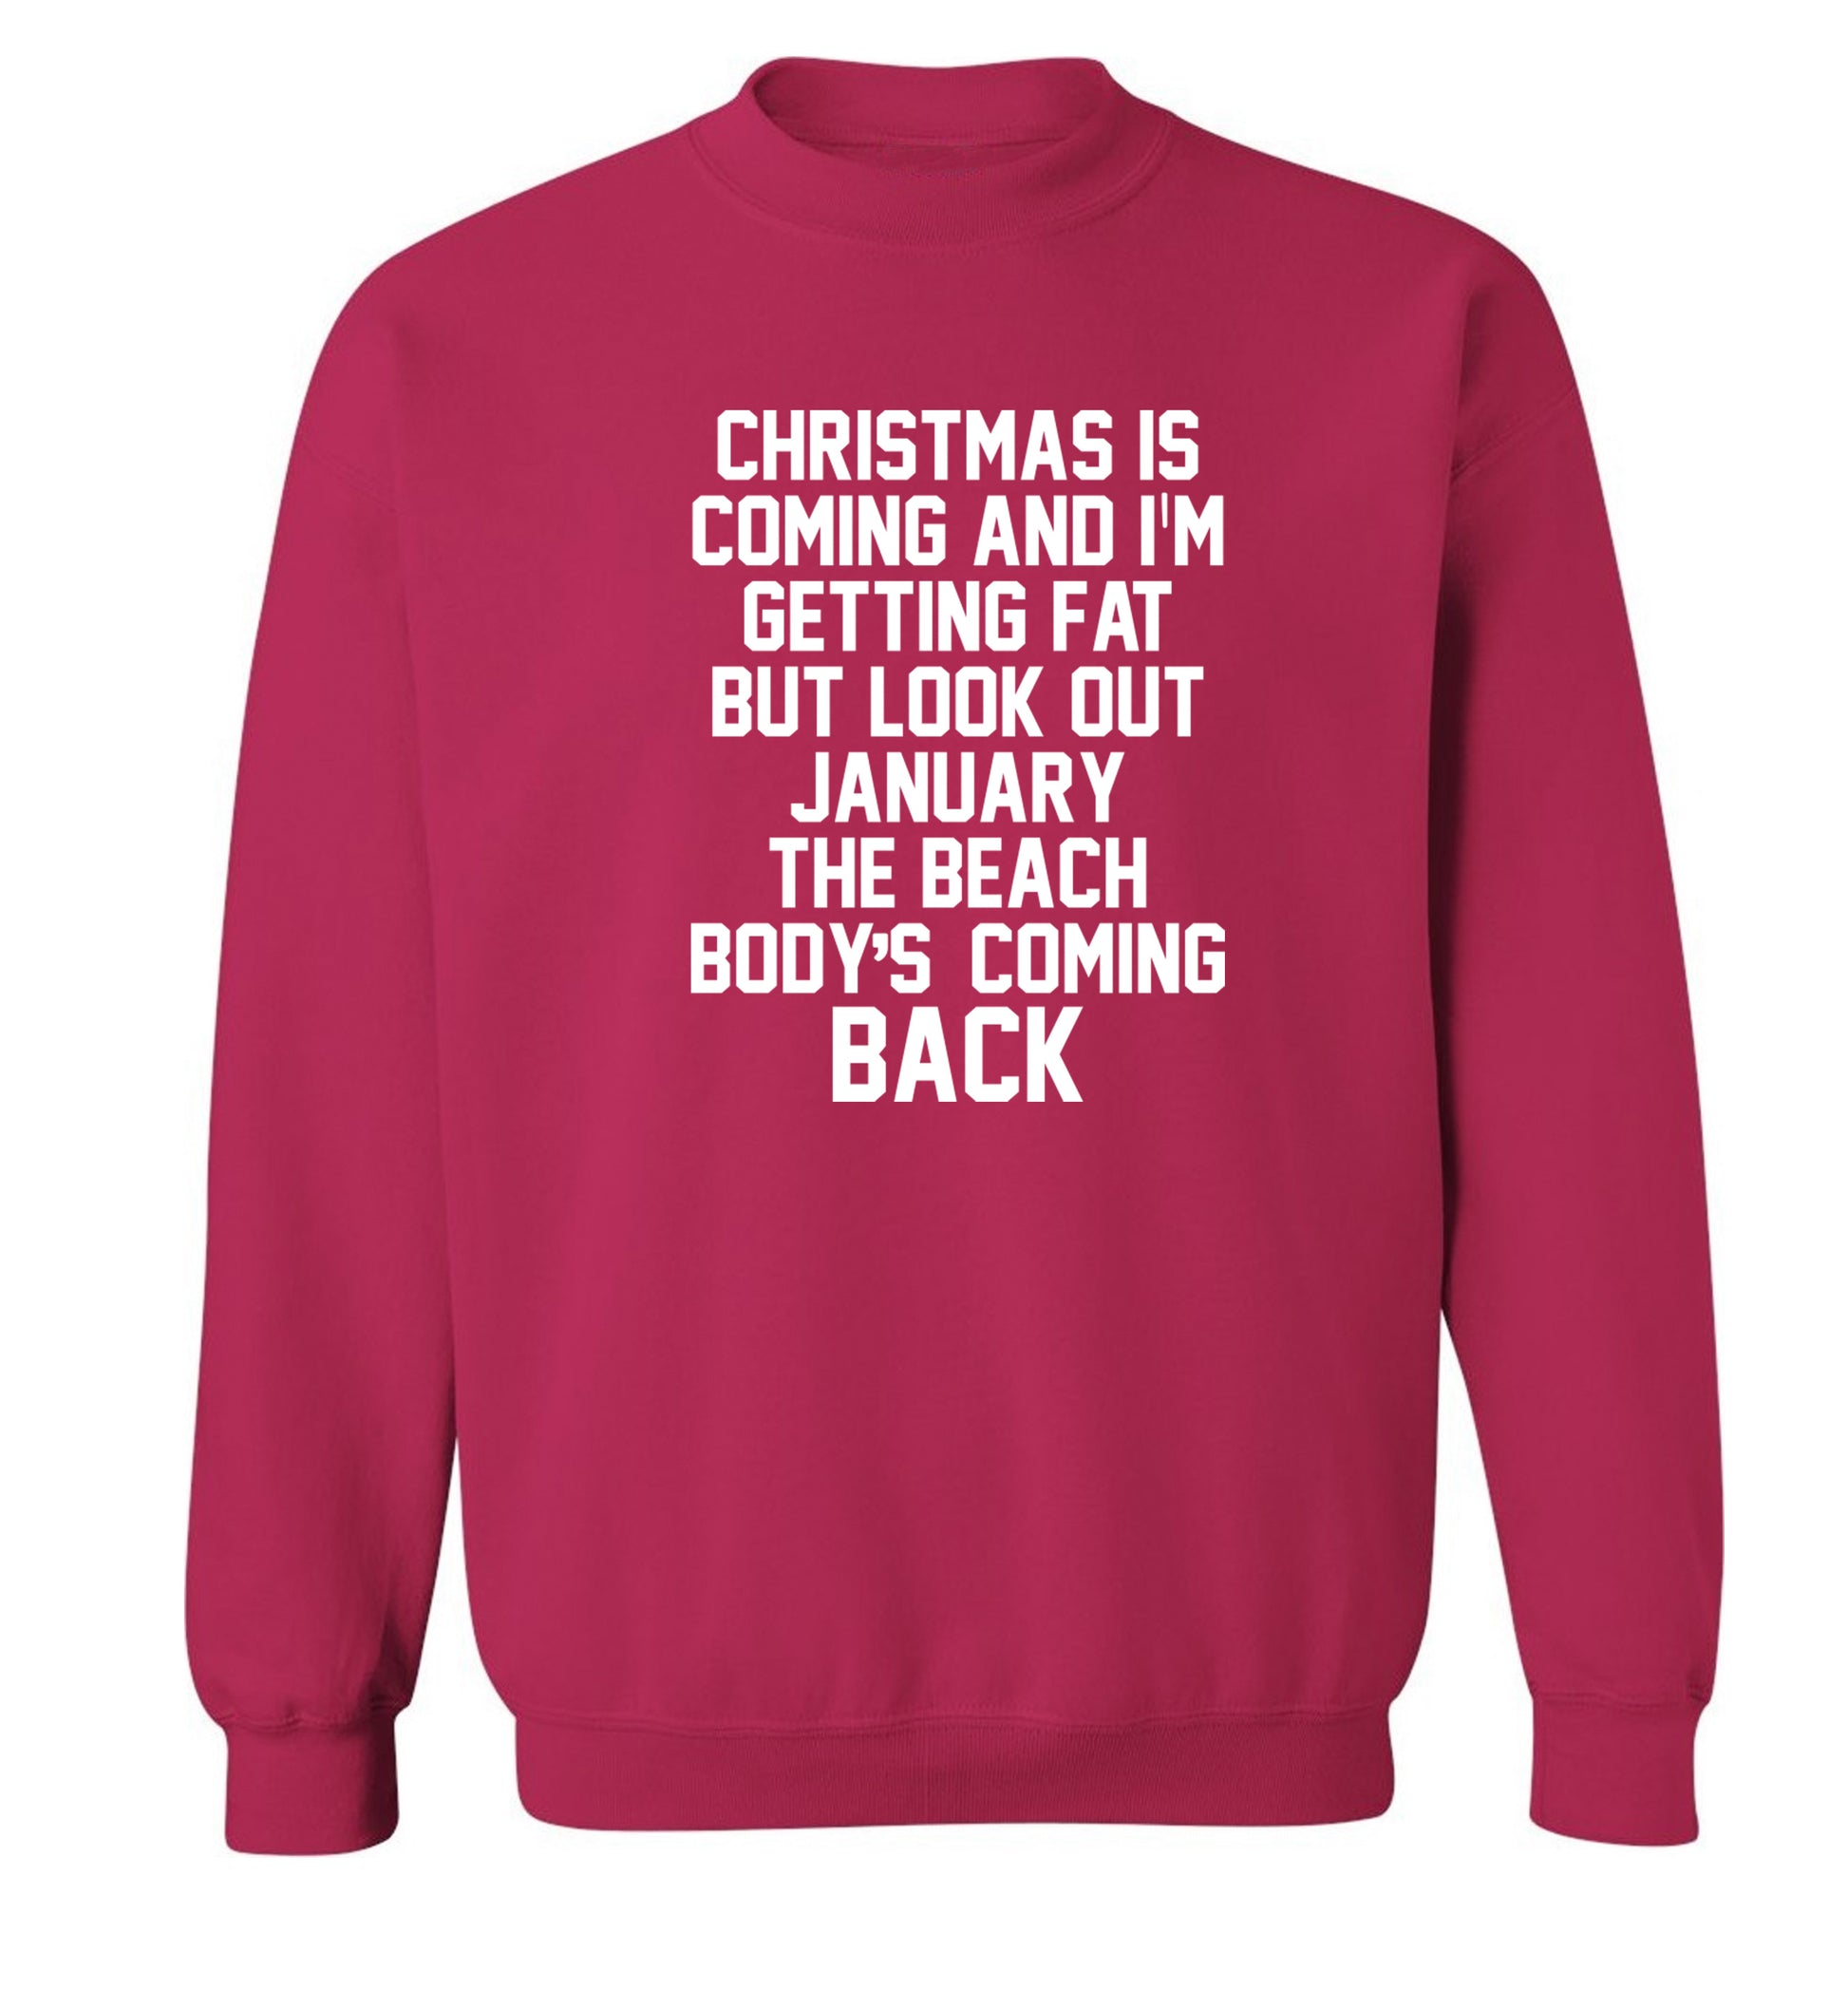 Christmas is coming and I'm getting fat but look out January the beach body's coming back! Adult's unisex pink Sweater 2XL